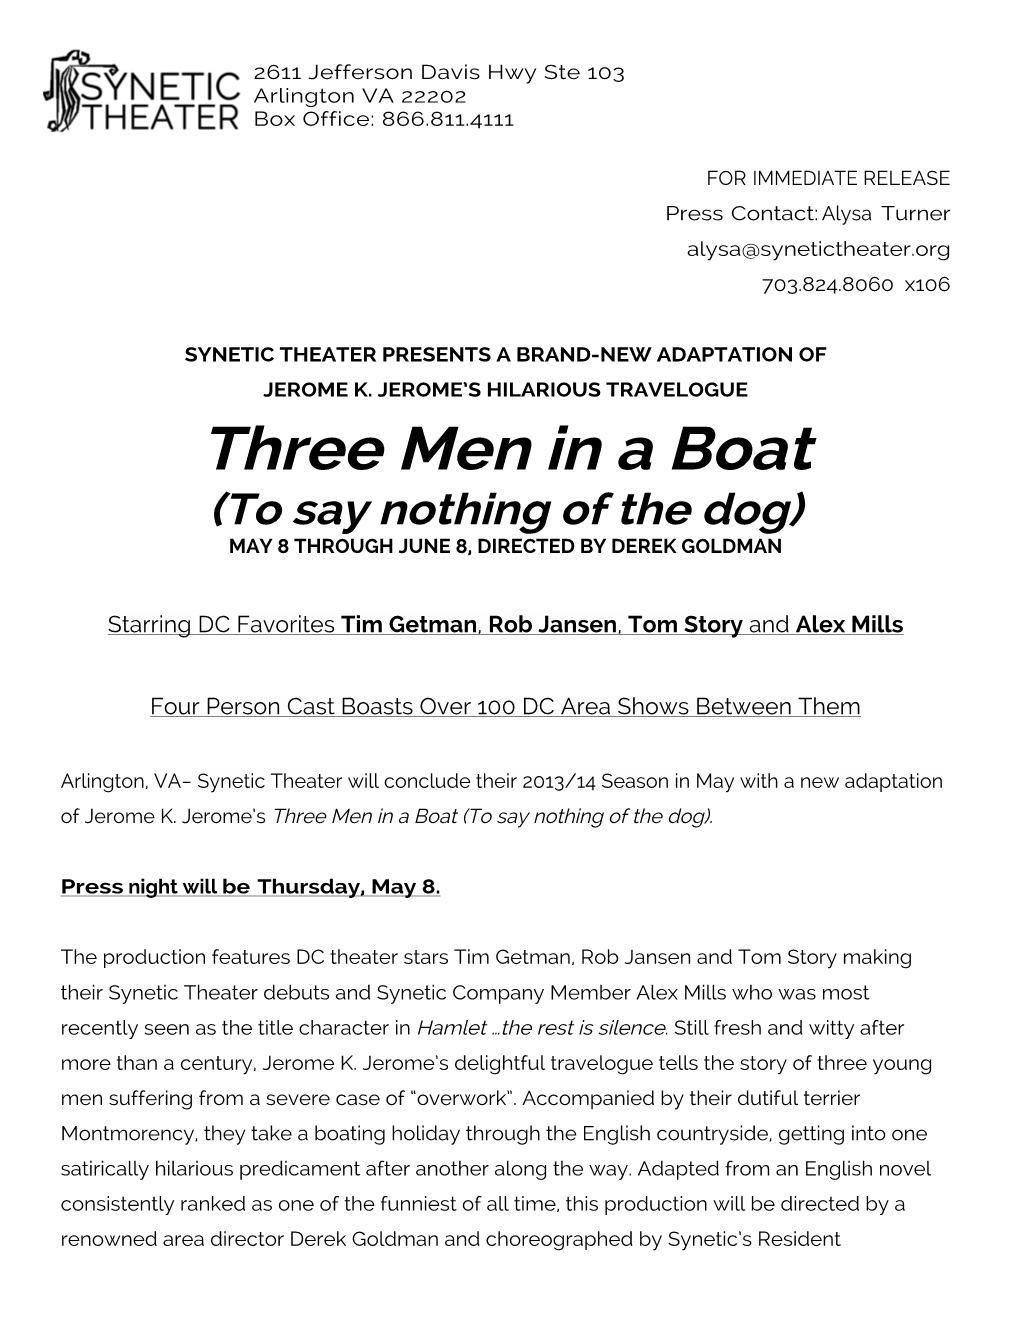 Three Men in a Boat (To Say Nothing of the Dog) MAY 8 THROUGH JUNE 8, DIRECTED by DEREK GOLDMAN